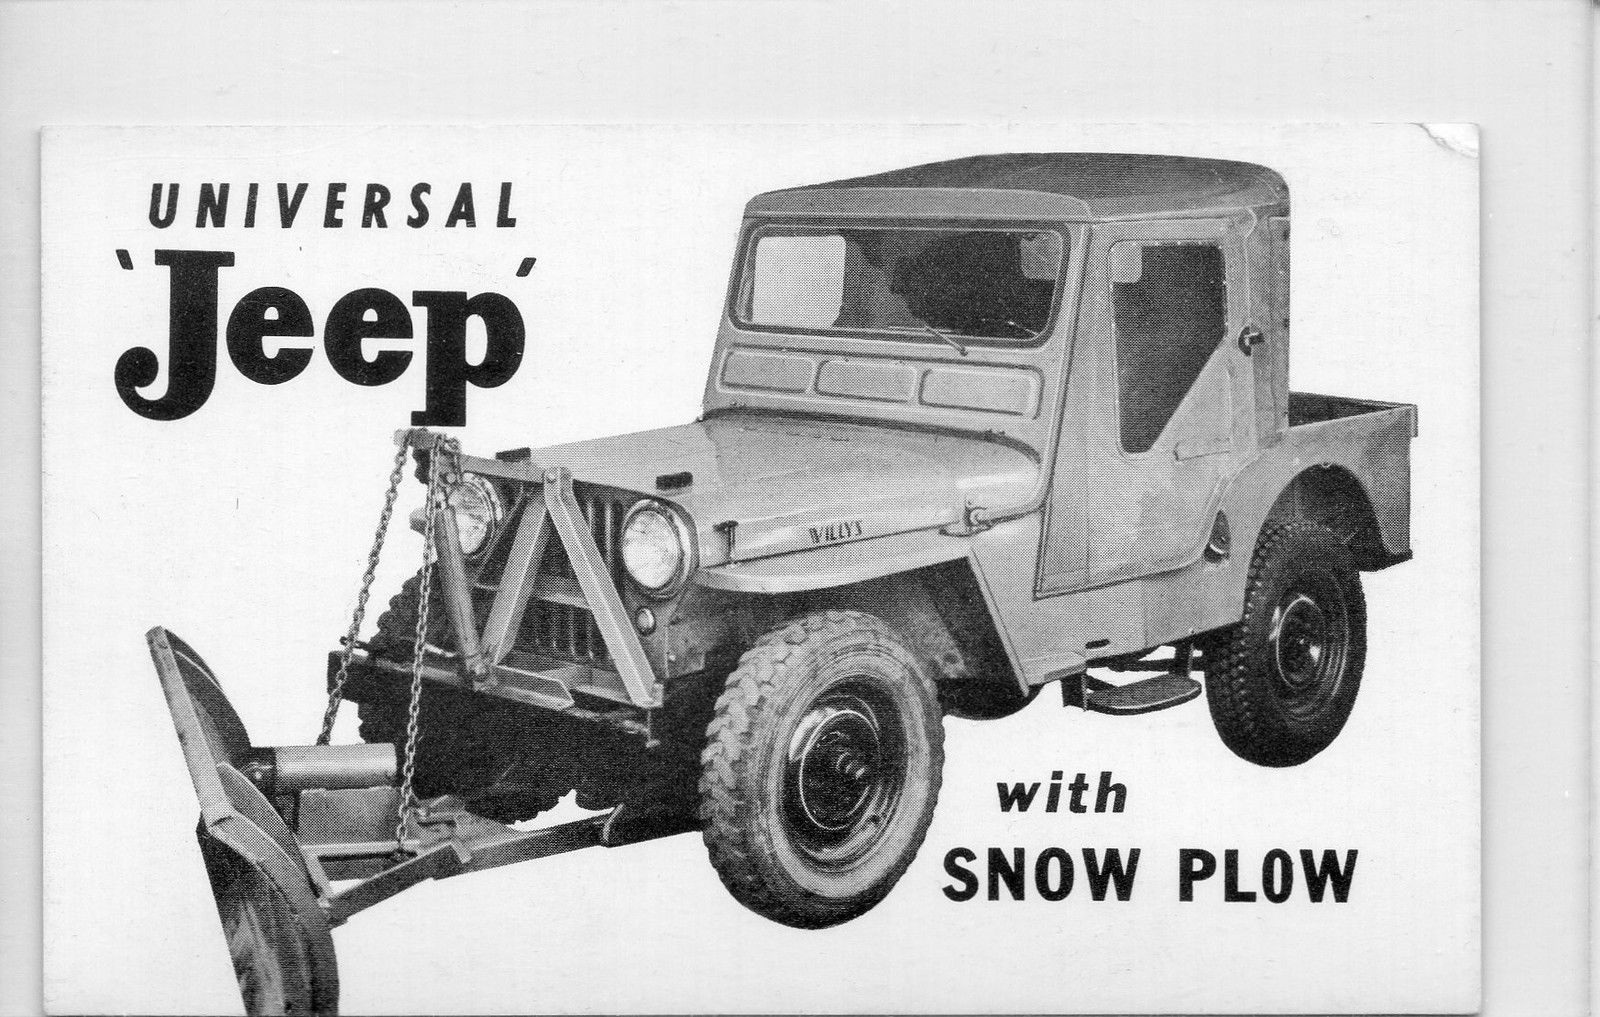 Willy cj-3a jeep parts #5